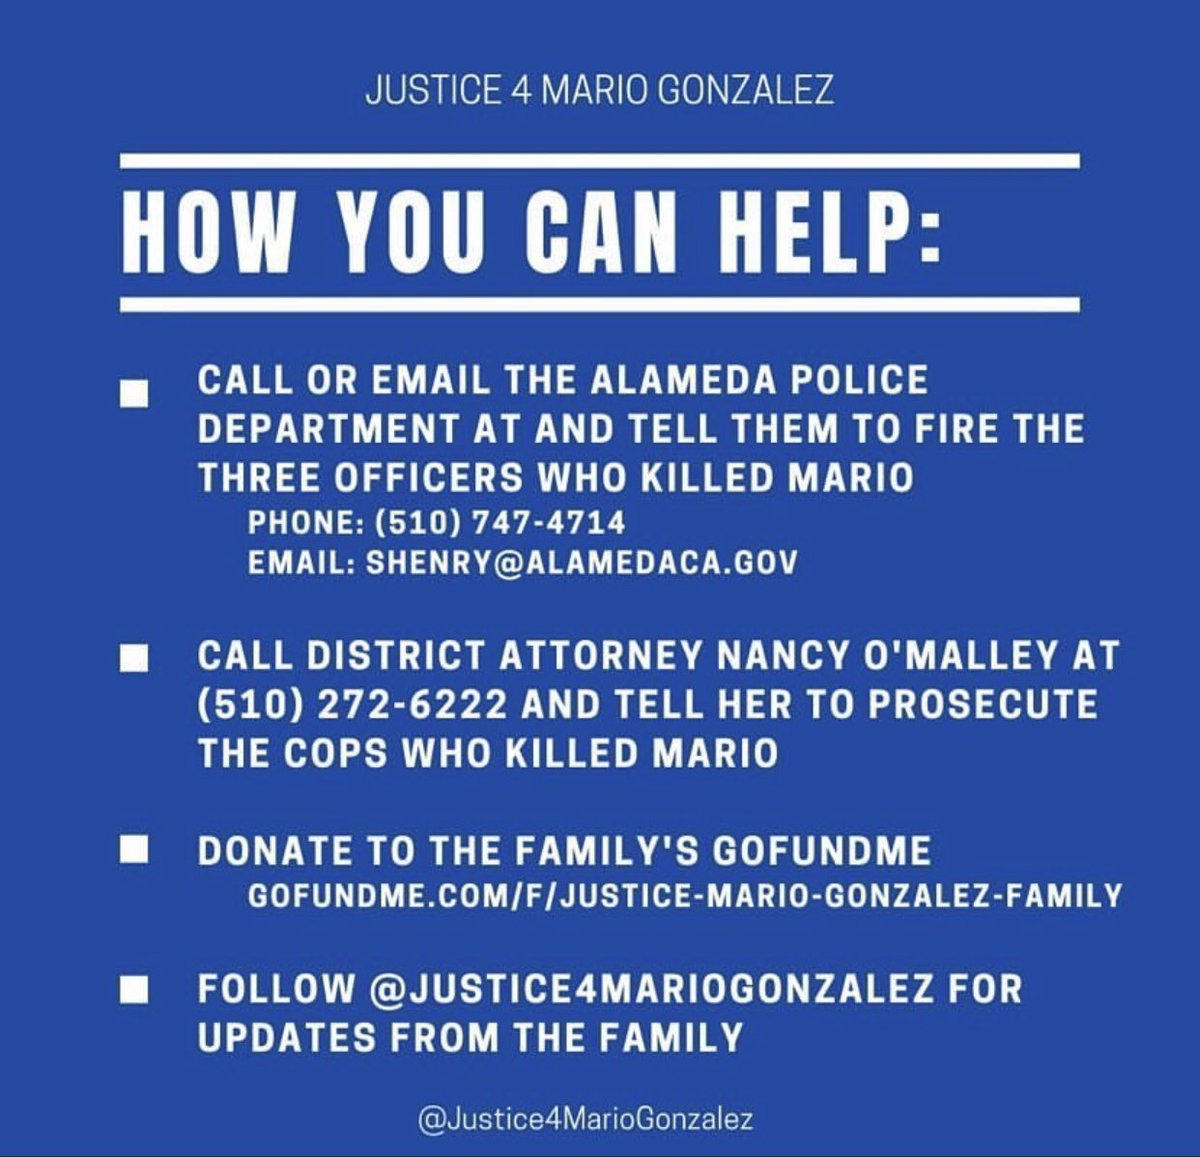 other ways to help !!!